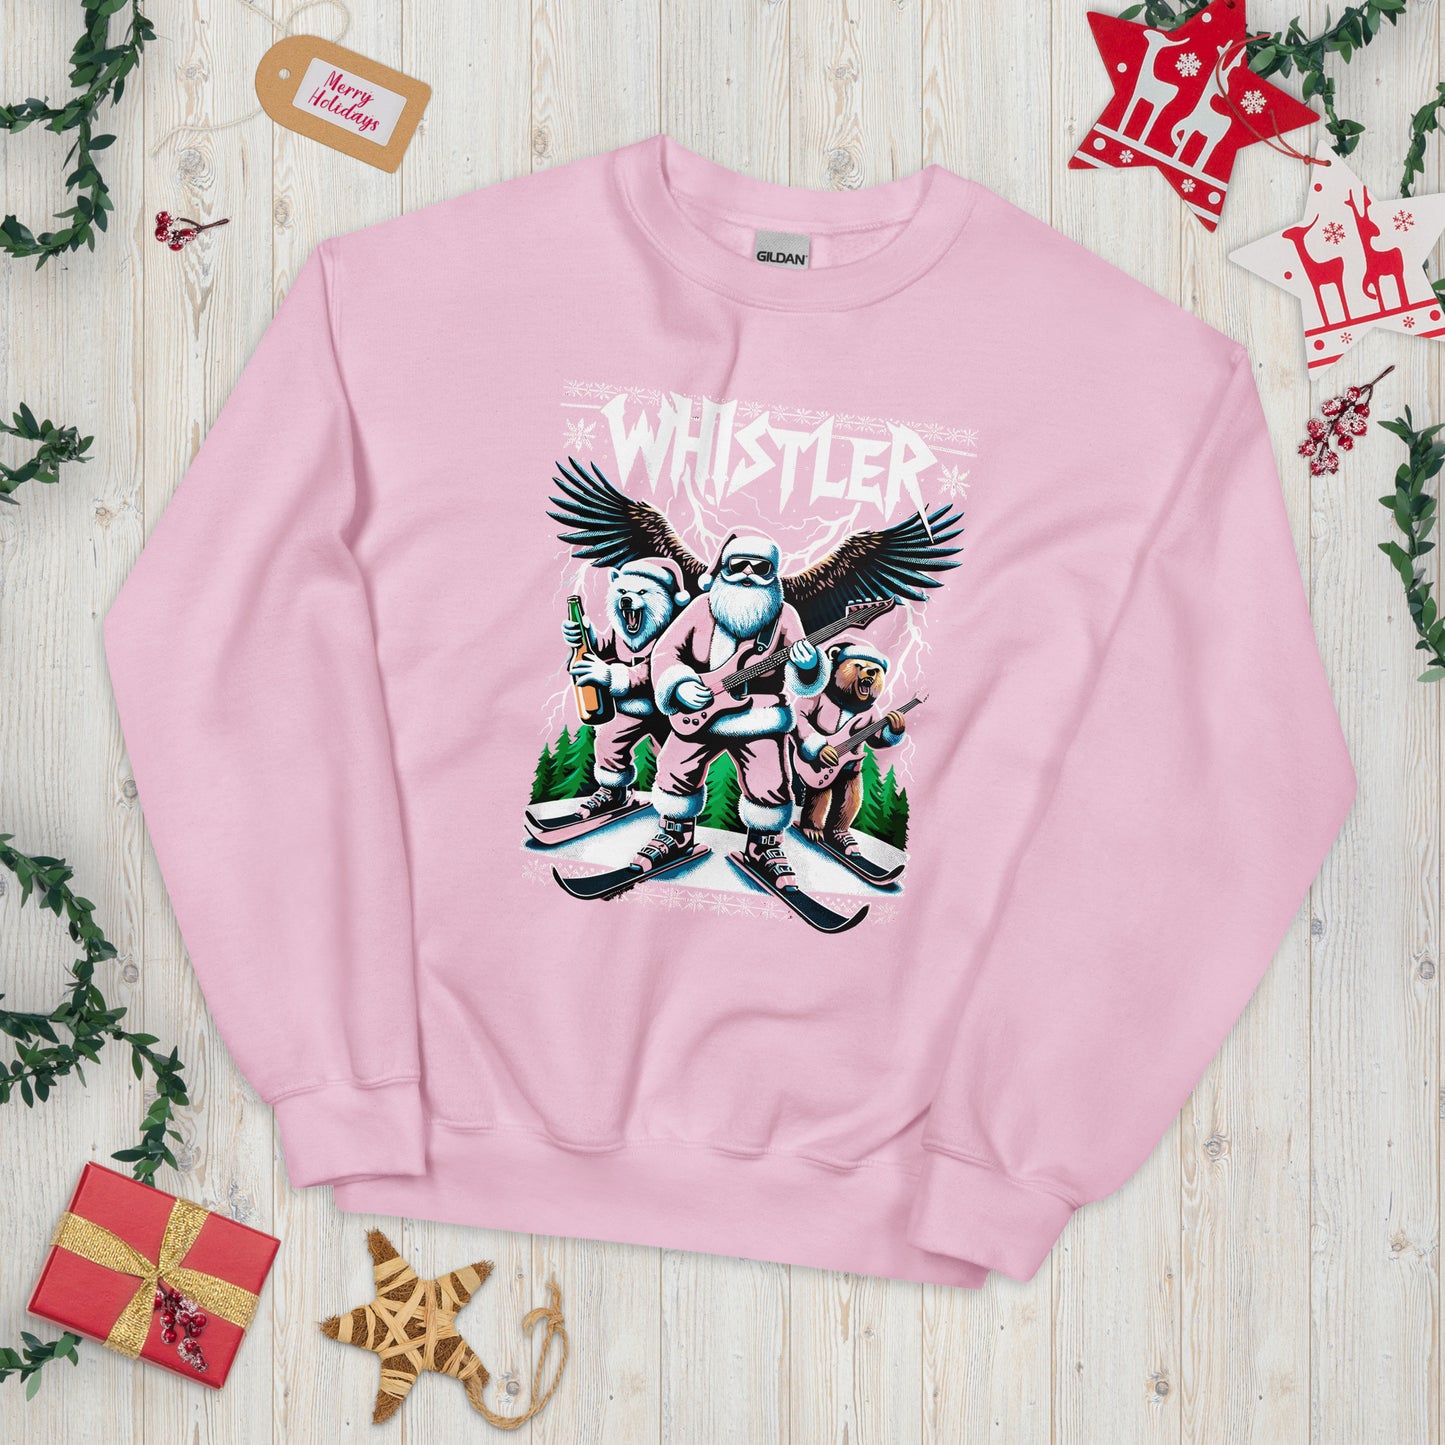 Santa skiing with electric guitar in Whistler ugly christmas sweater, printed by Whistler Shirts